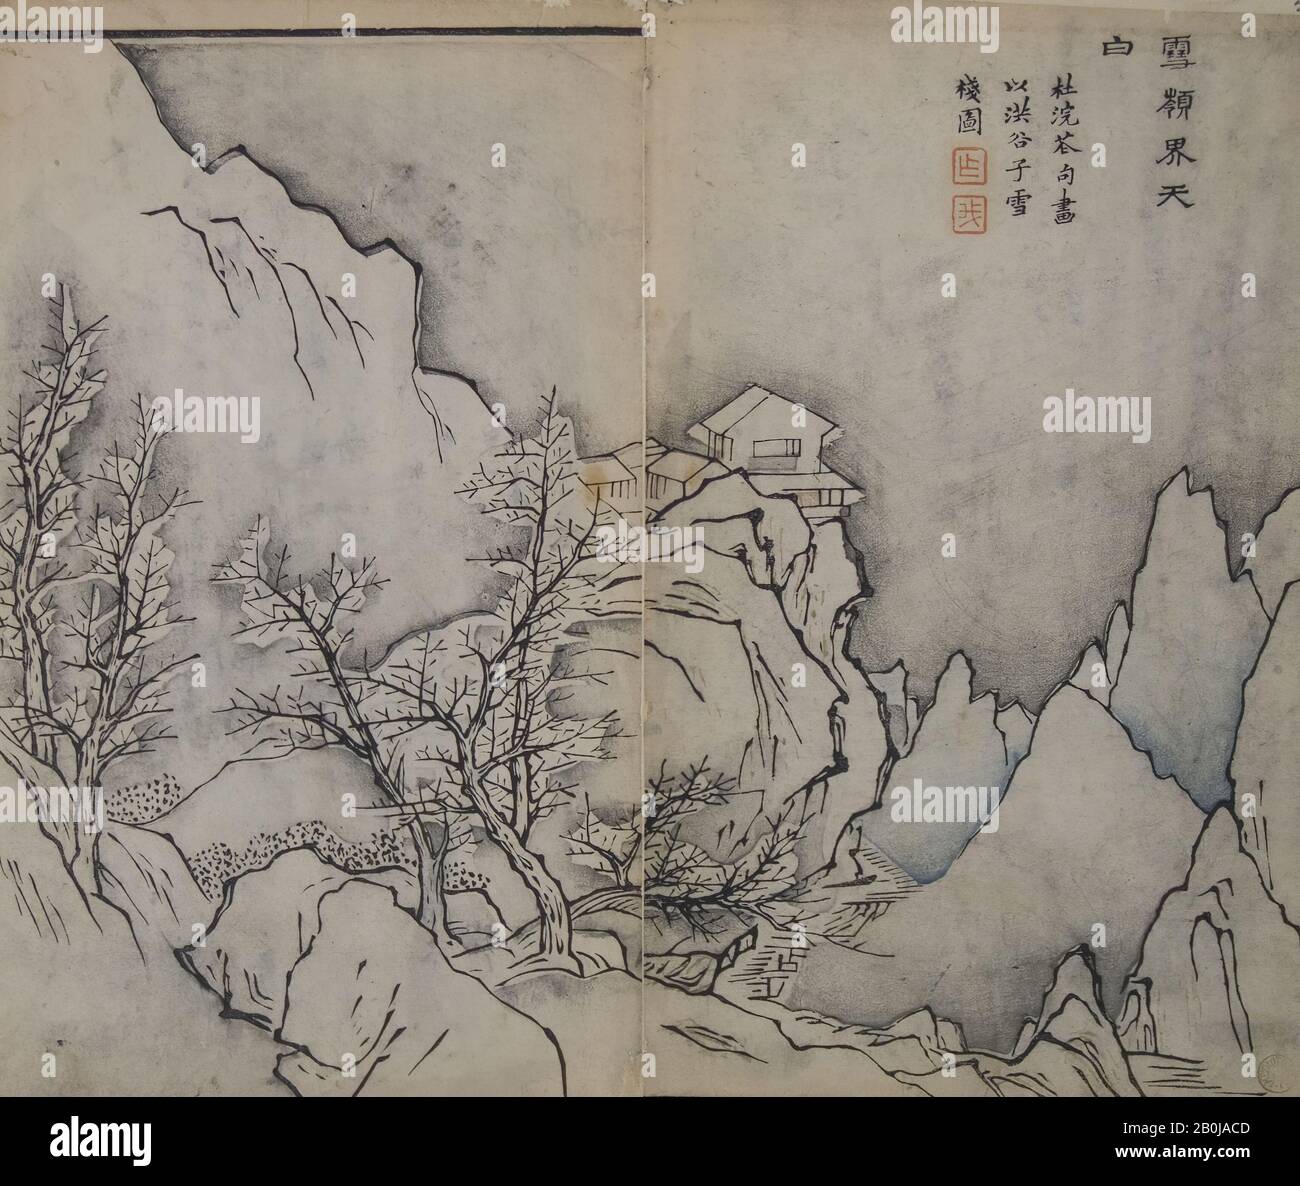 Designed by Wang Gai, Snowy Peaks Touching the Heavens, in the manner of Snow-covered Inn by Jing Hao (active ca. 870–ca. 930), from the Mustard Seed Garden Manual of Painting, China, Designed by Wang Gai (Chinese, 1645–1710), After Jing Hao (Chinese, active ca. 870–930), First edition, 1679, China, Woodblock print; ink and color on paper, 9 5/8 x 11 13/16 in. (24.4 x 30 cm), Prints Stock Photo